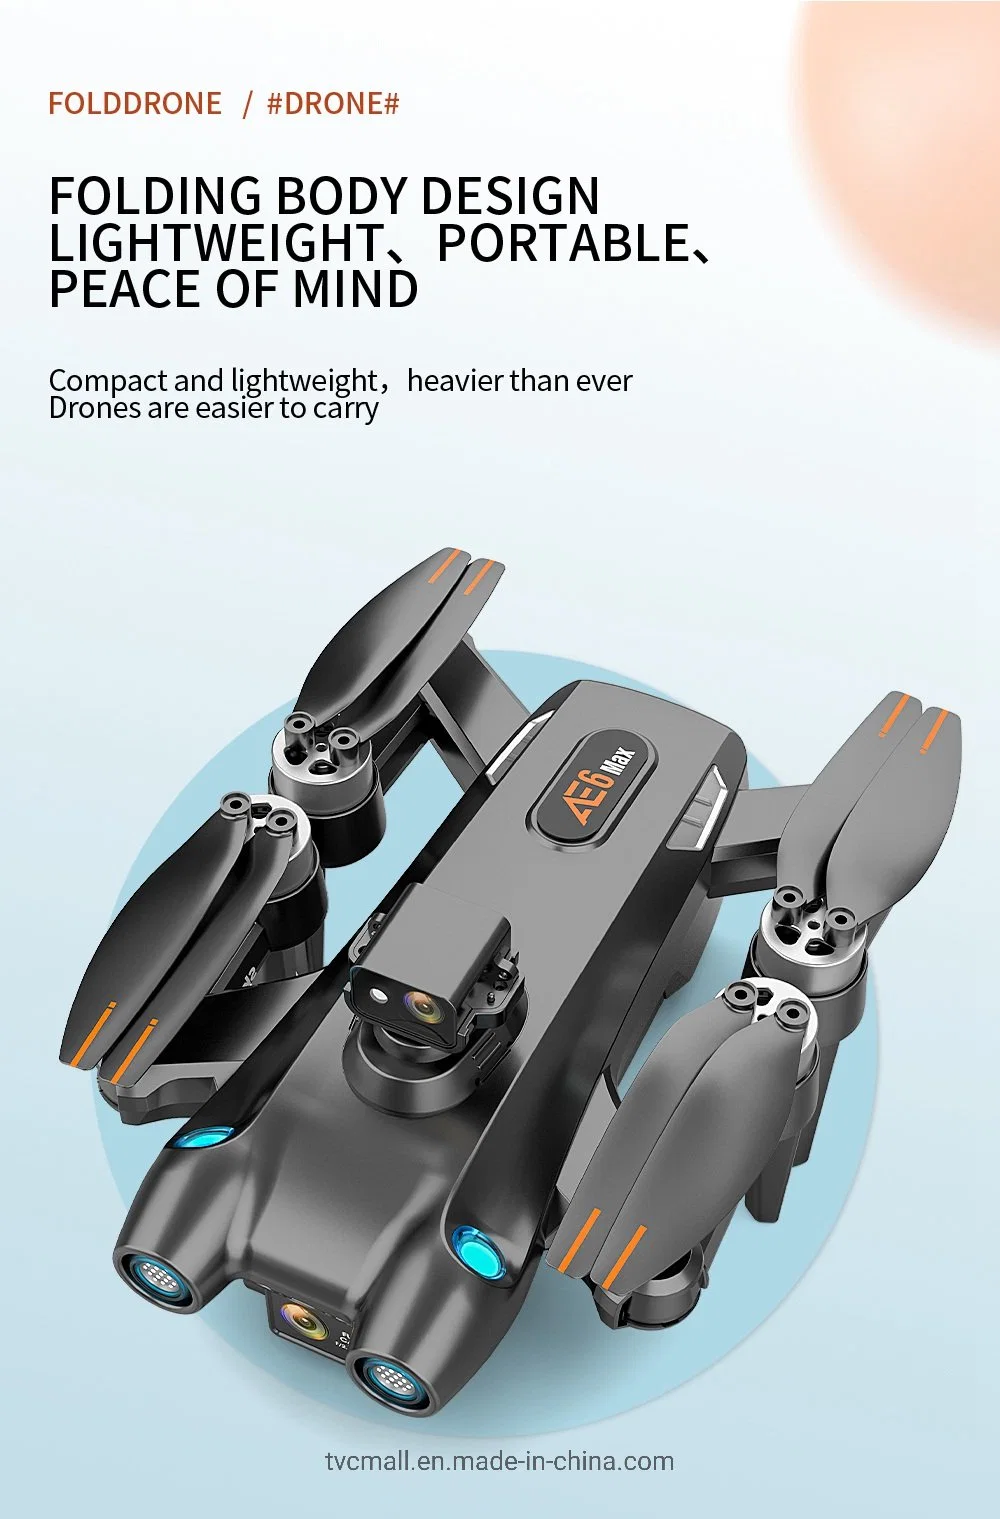 Ae6 Max 360-Degree Obstacle Avoidance RC Quadcopter Brushless 4-Axis HD Dual-Lens Foldable RC Drone with Remote Control - Grey